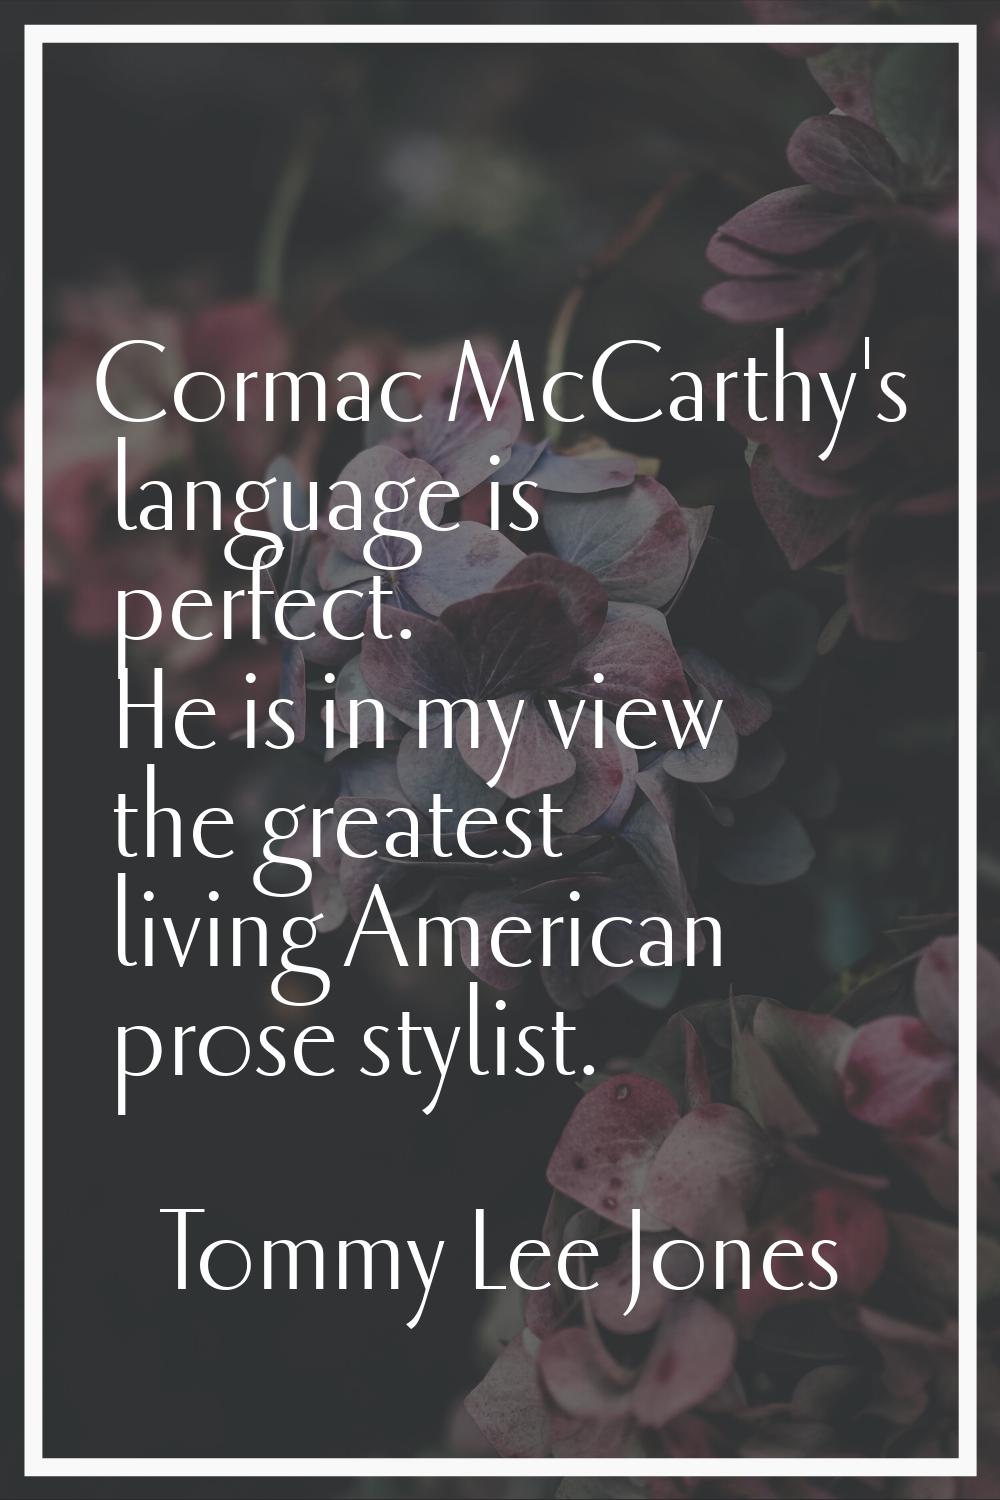 Cormac McCarthy's language is perfect. He is in my view the greatest living American prose stylist.